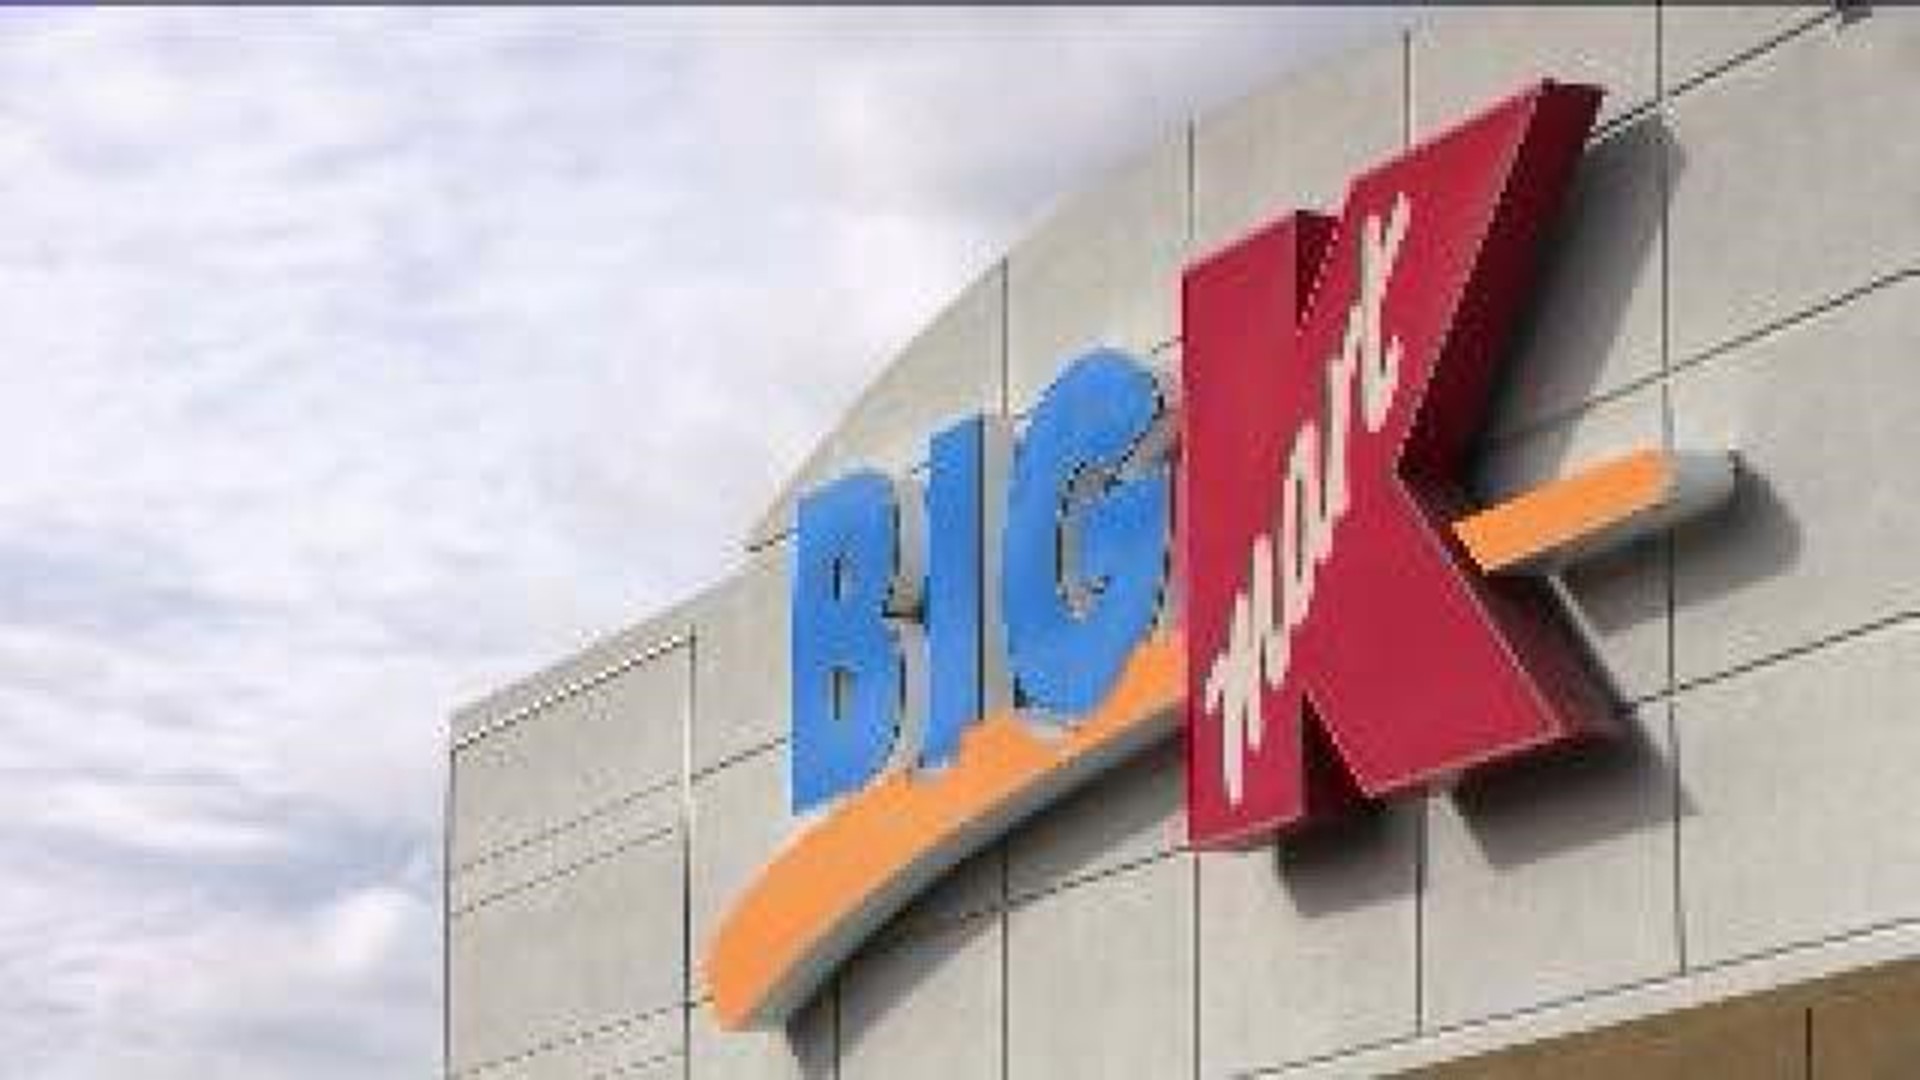 Kmart to Open at 6 a.m. on Thanksgiving Day